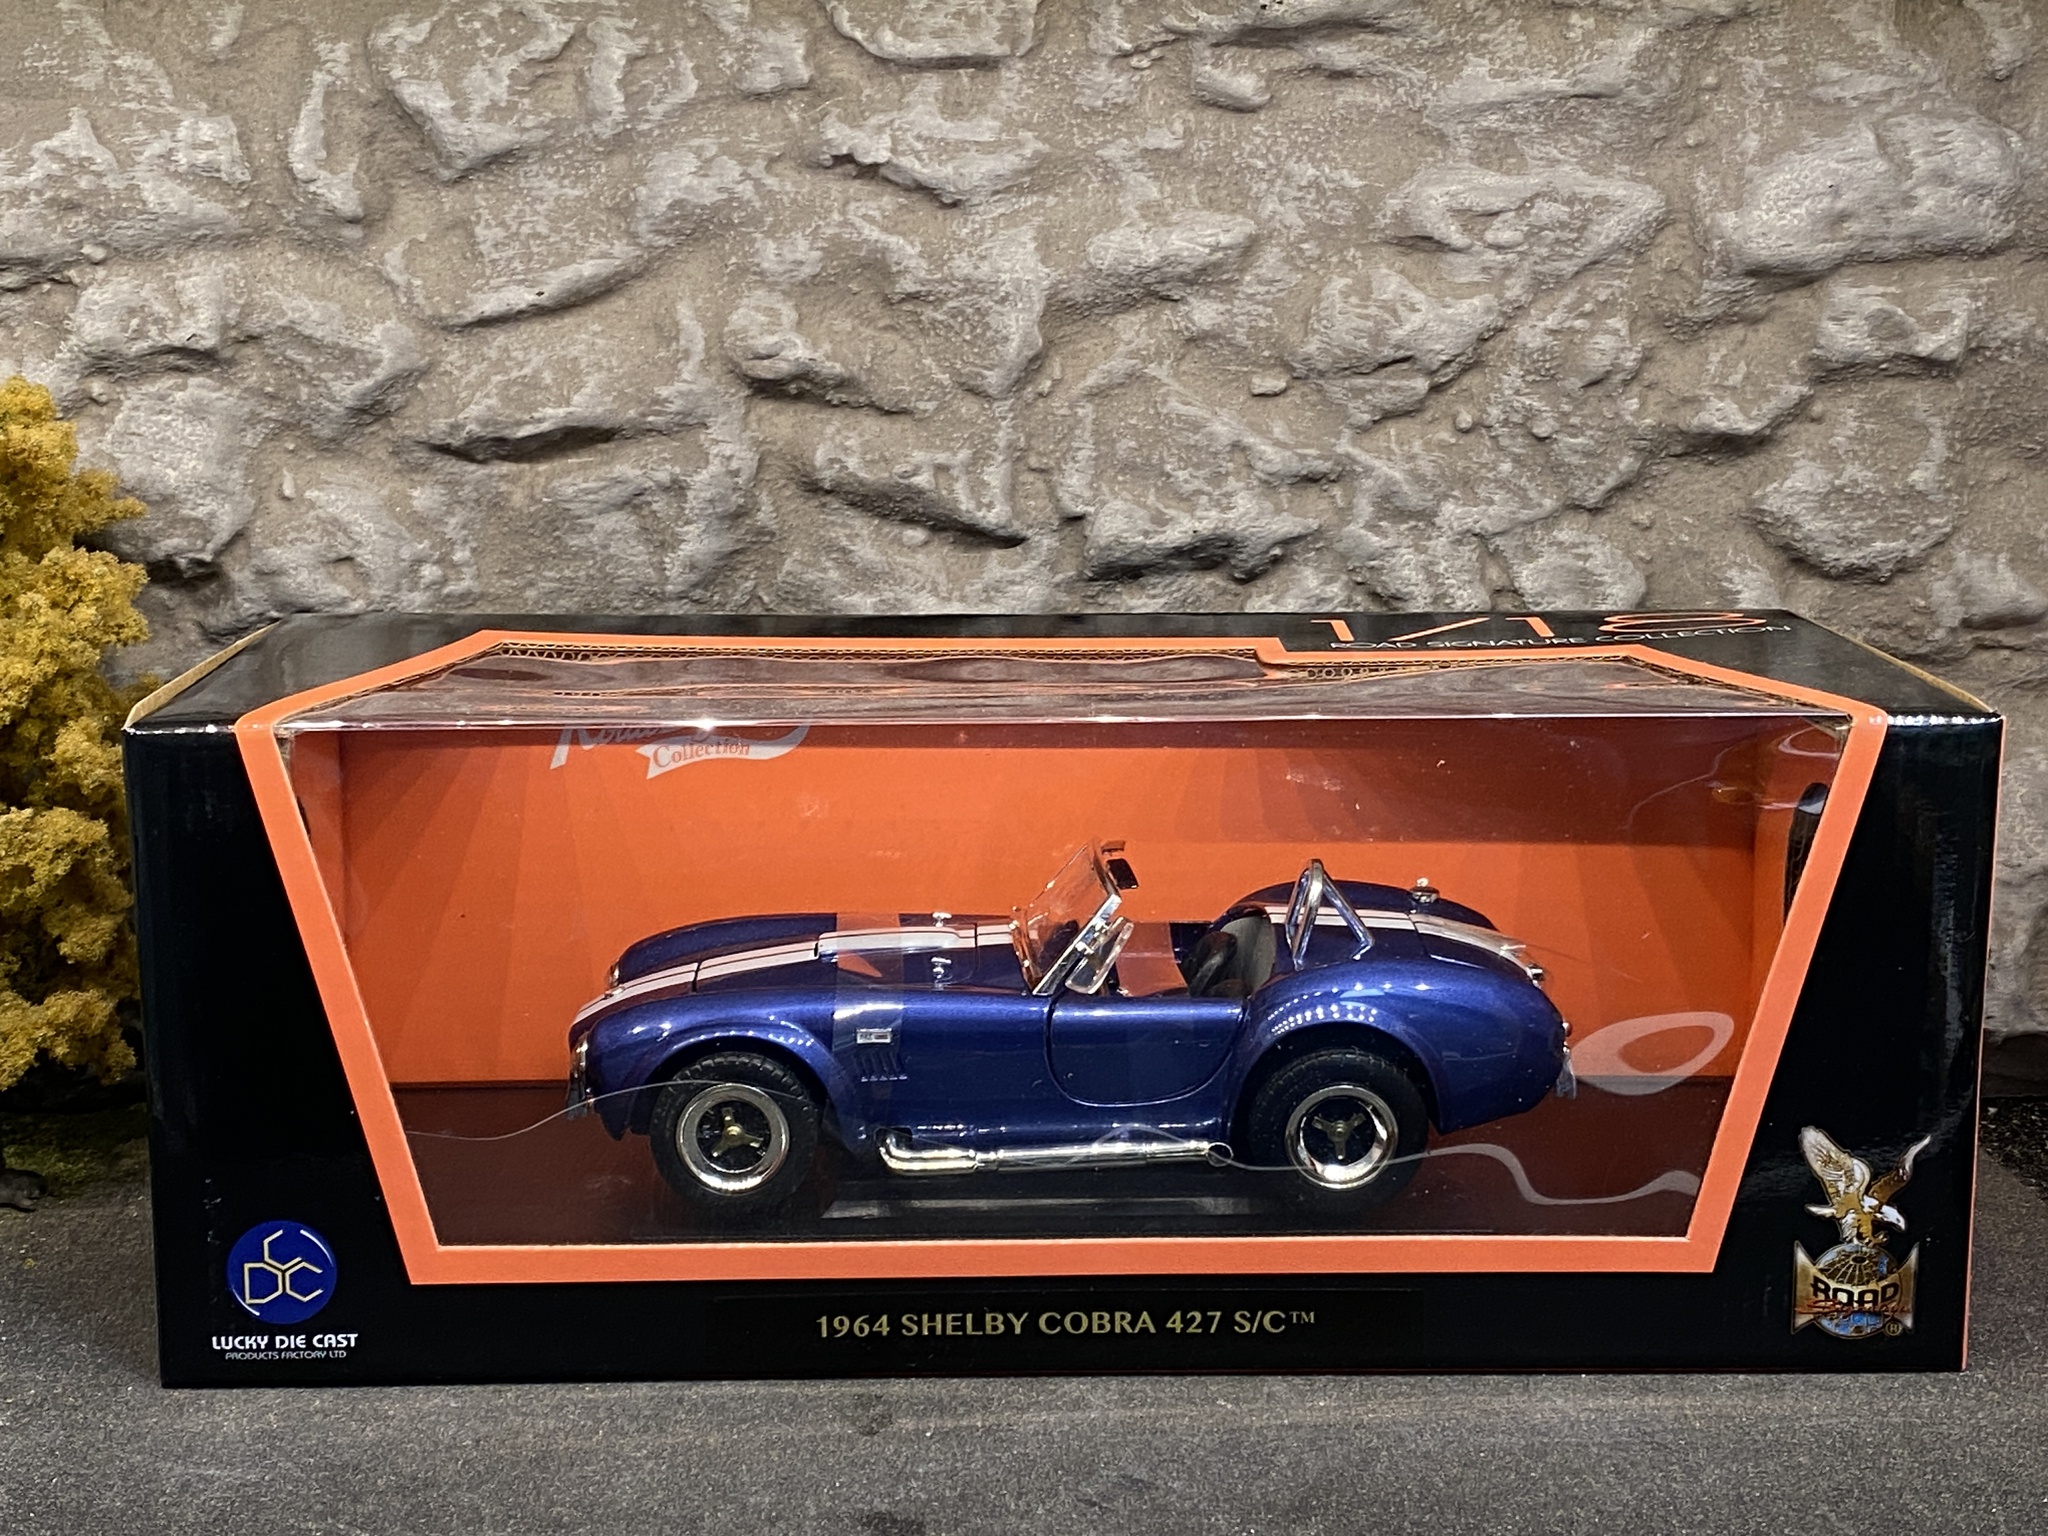 Skala 1/18 Shelby Cobra 427 S/C 1964' blue fr Lucky Diecast "Road Signature Collection"